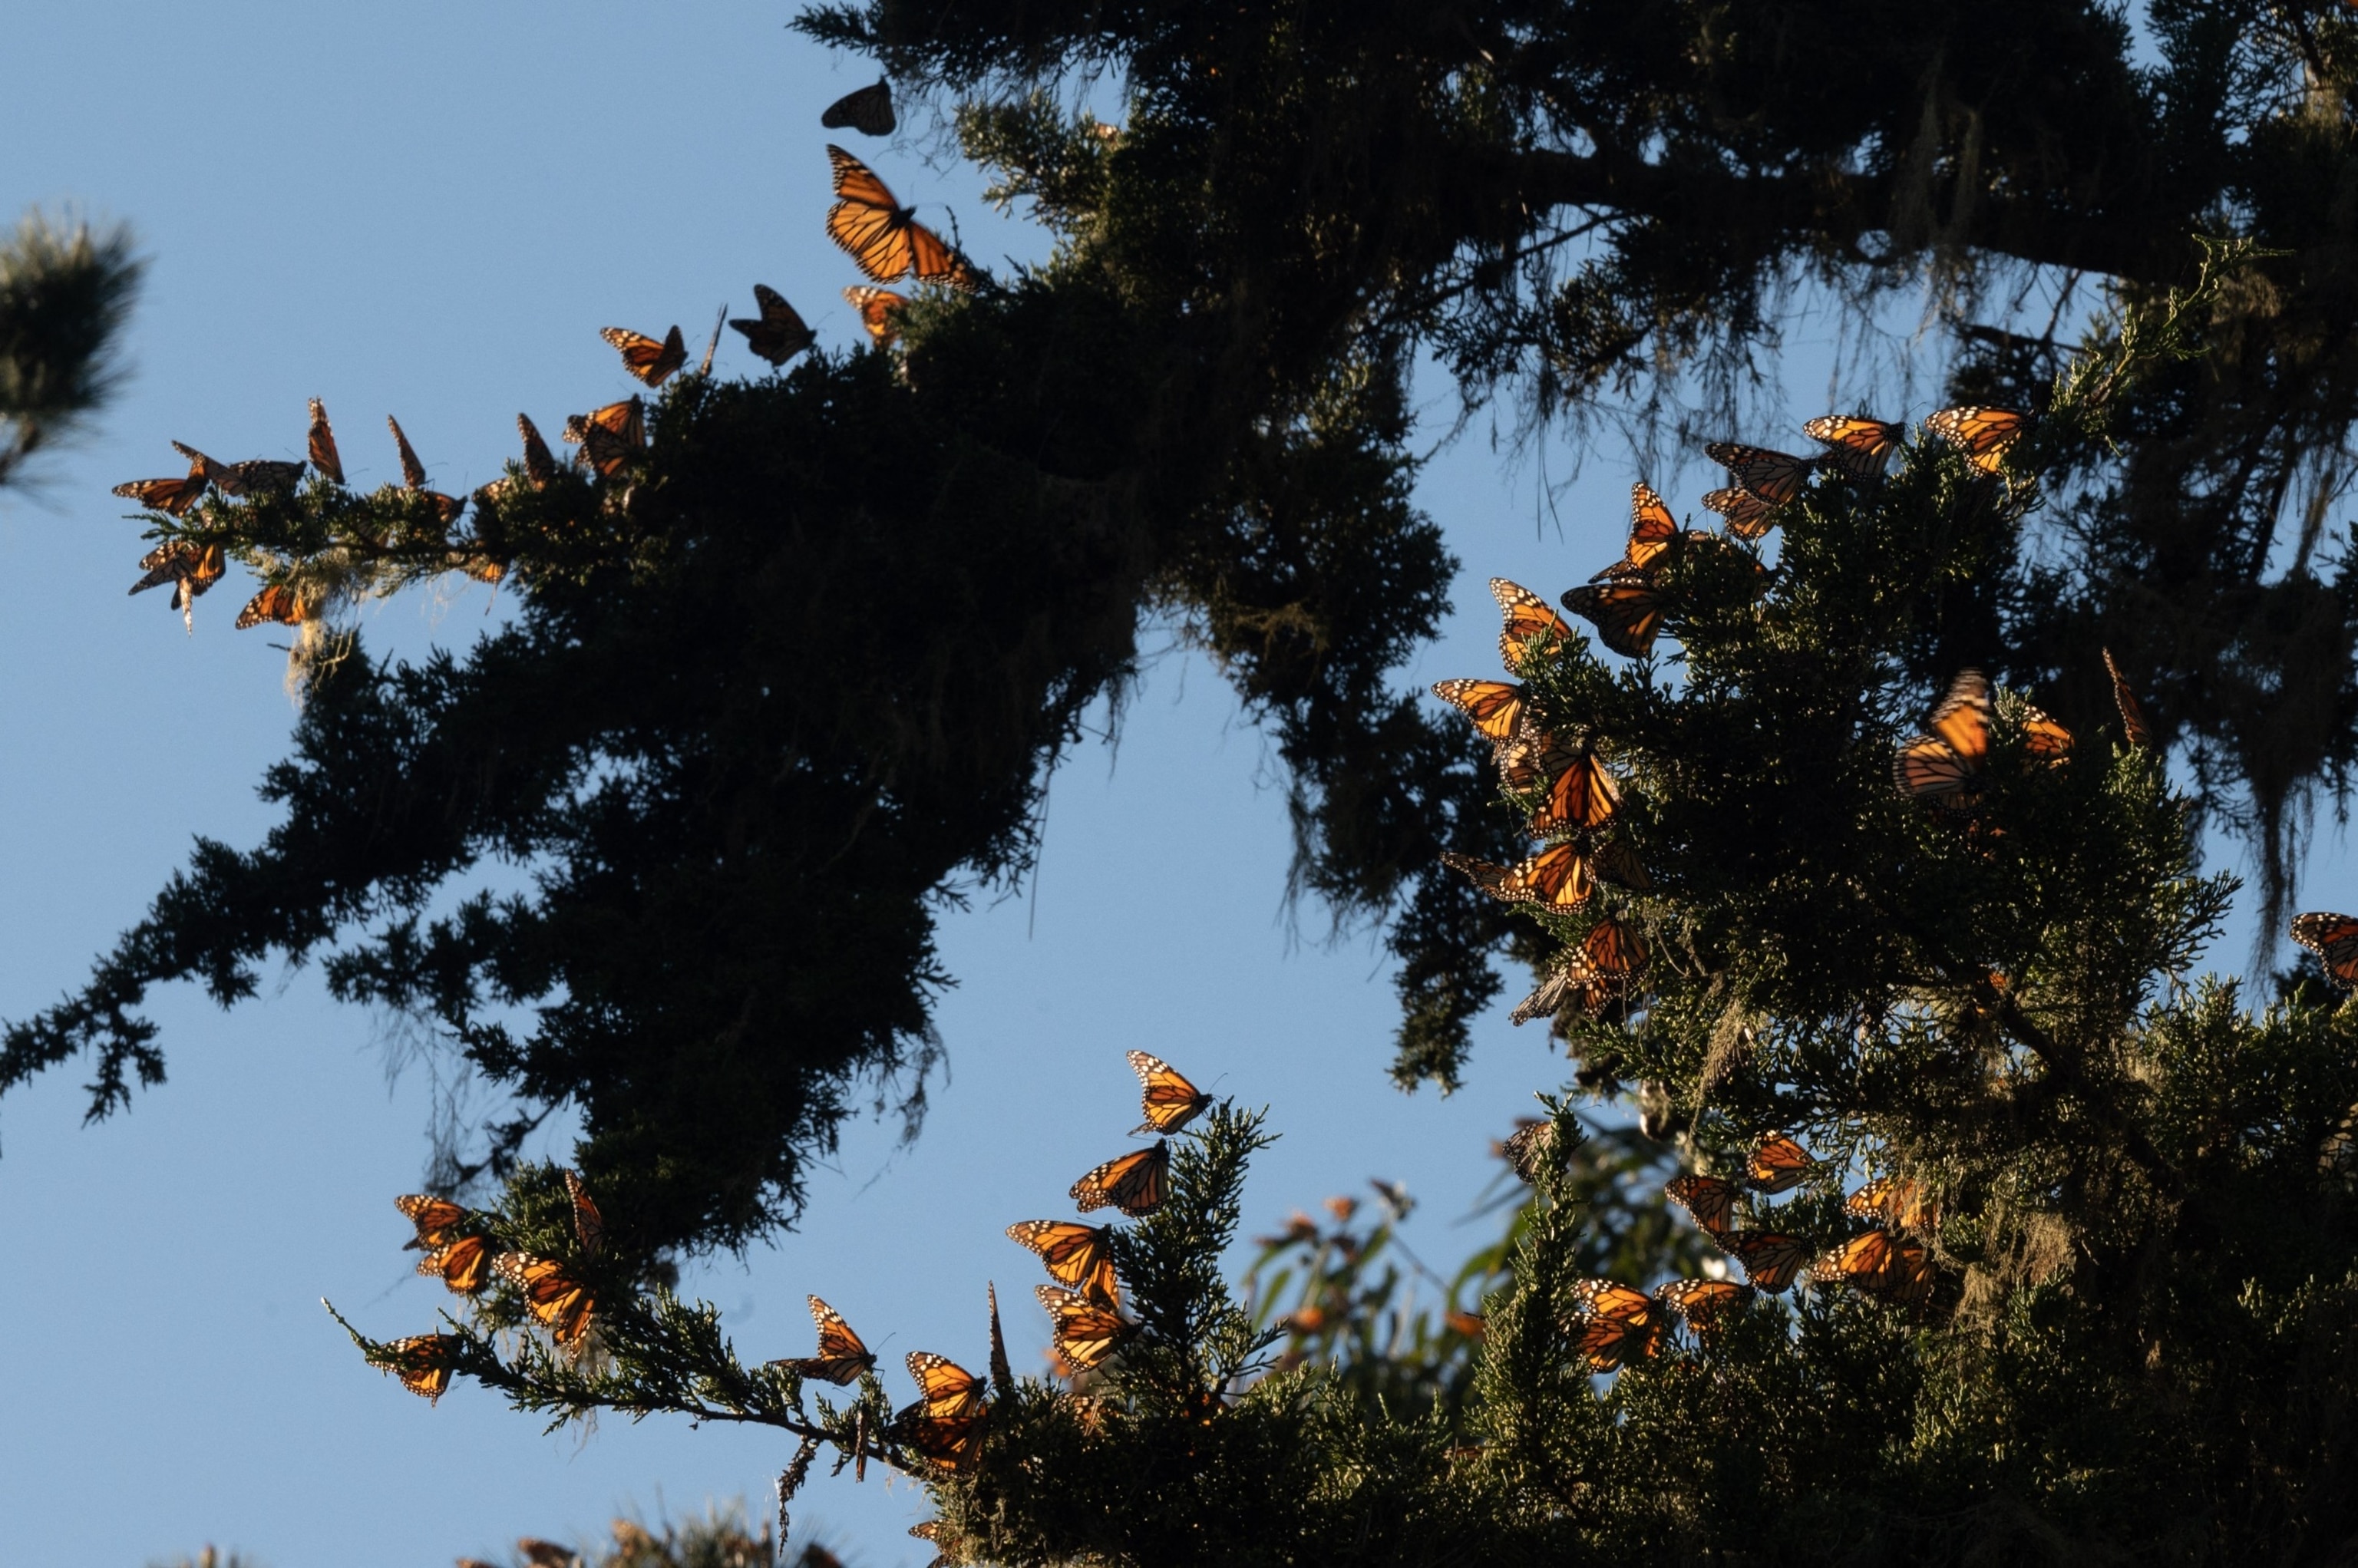 PHOTO: Monarch butterflies are seen in the trees as they overwinter in and around the Pacific Grove Monarch Sanctuary in Pacific Grove, California on January 26, 2023.